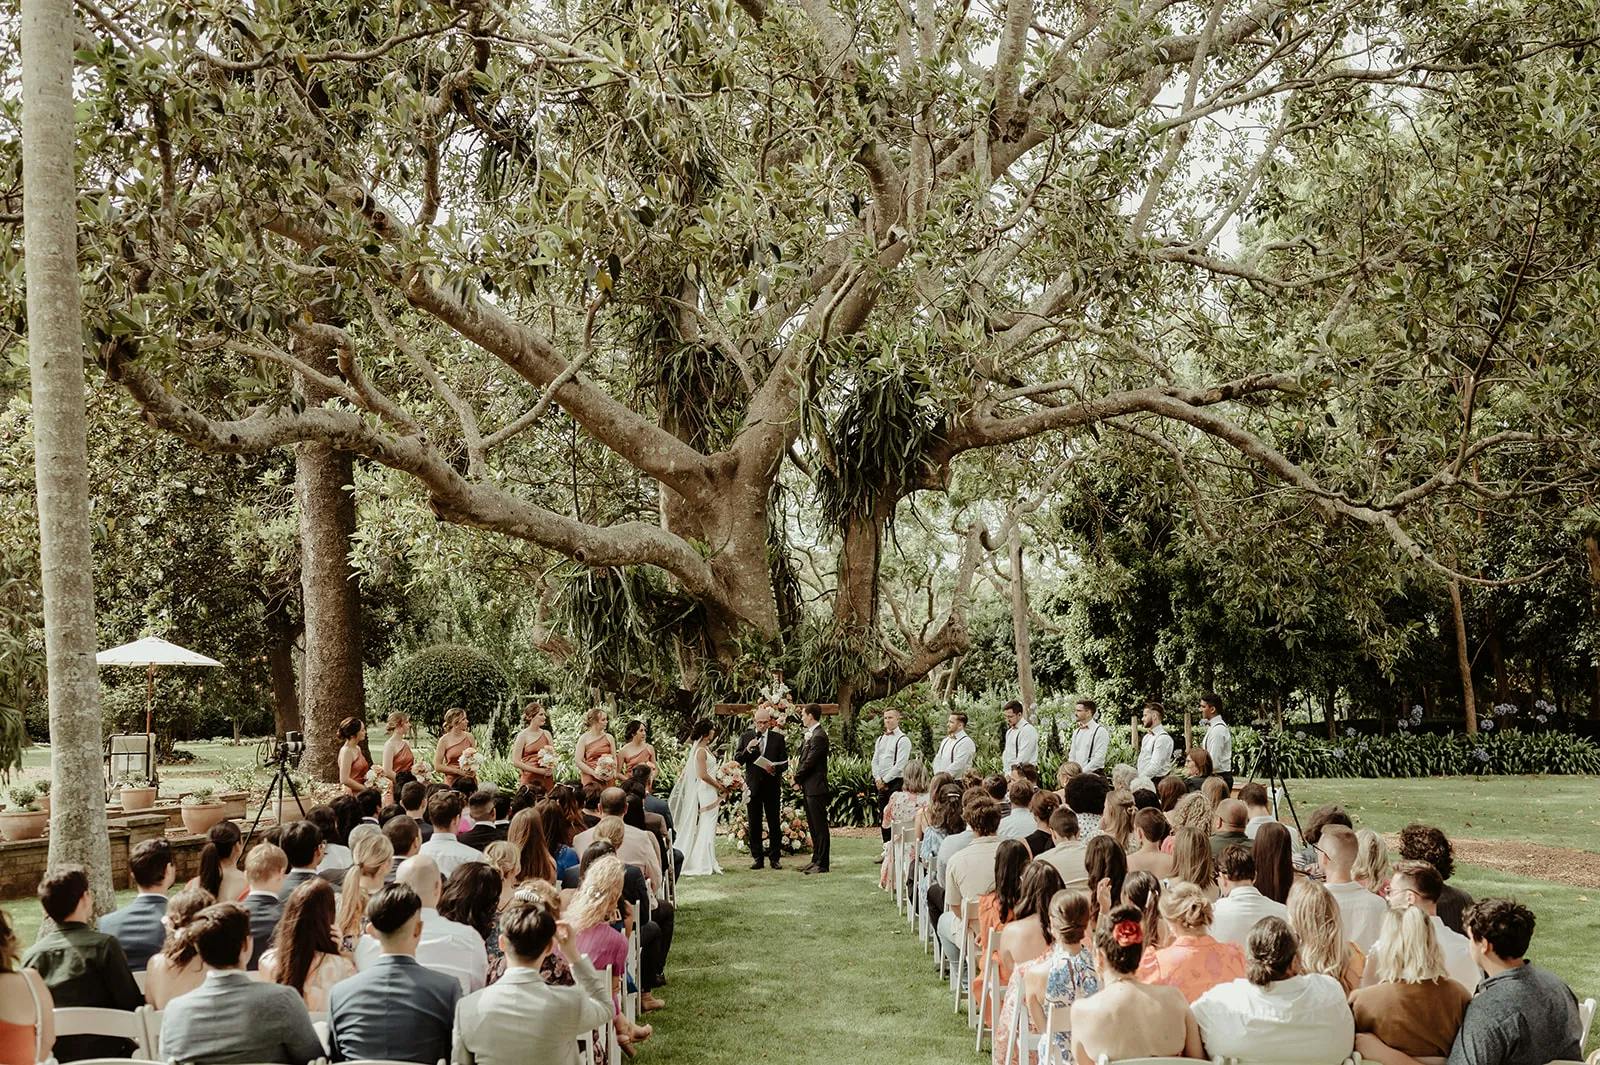 Outdoor wedding ceremony under a large tree, with the couple standing in front of the officiant. Guests are seated in rows of white chairs, and the bridal party is to the sides, wearing coordinating attire. The setting is lush with greenery and natural light.